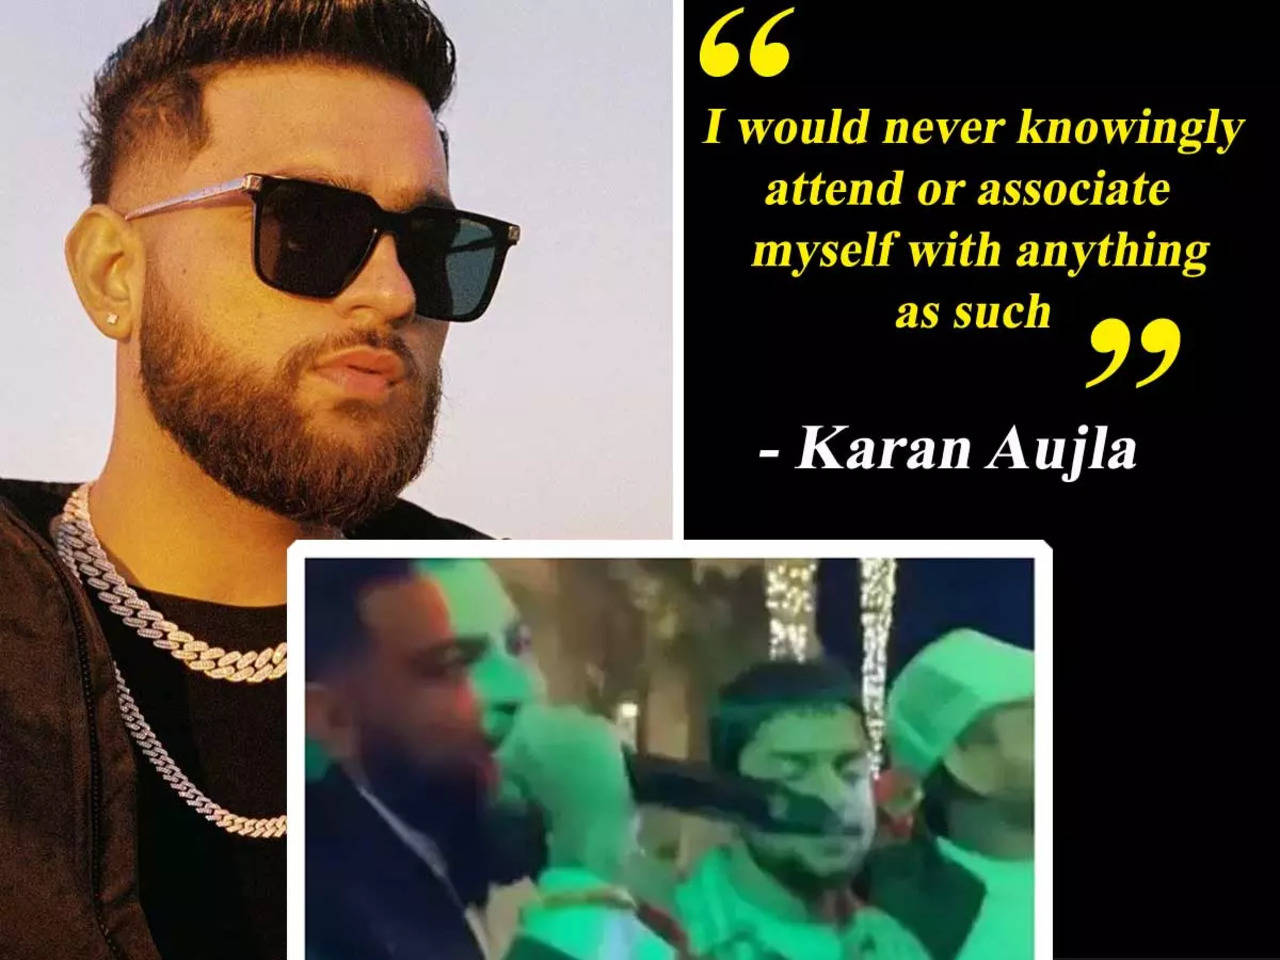 Karan Aujla breaks his silence on the viral video that featured ...